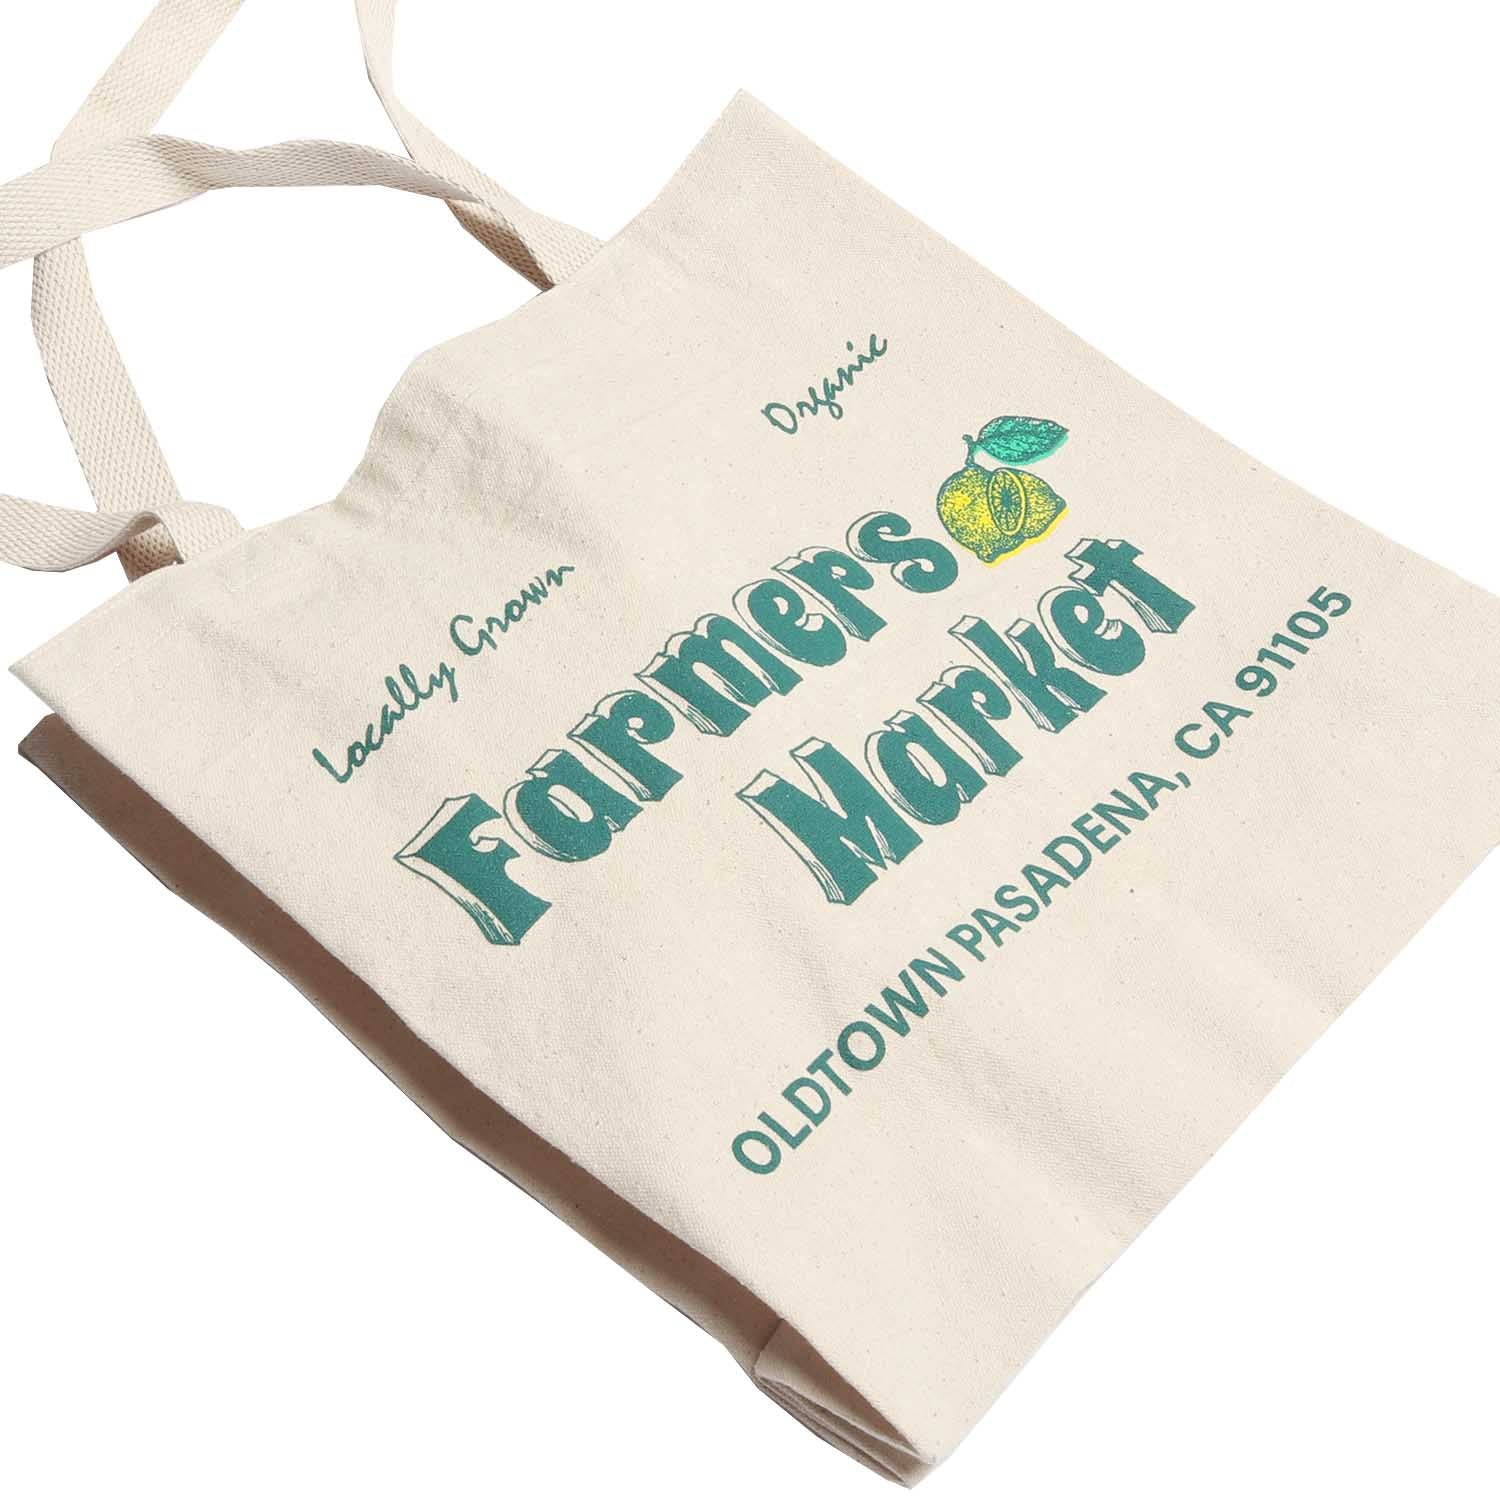 Tote Bags Market Size, Growth, Share, Trends and Forecast 2032